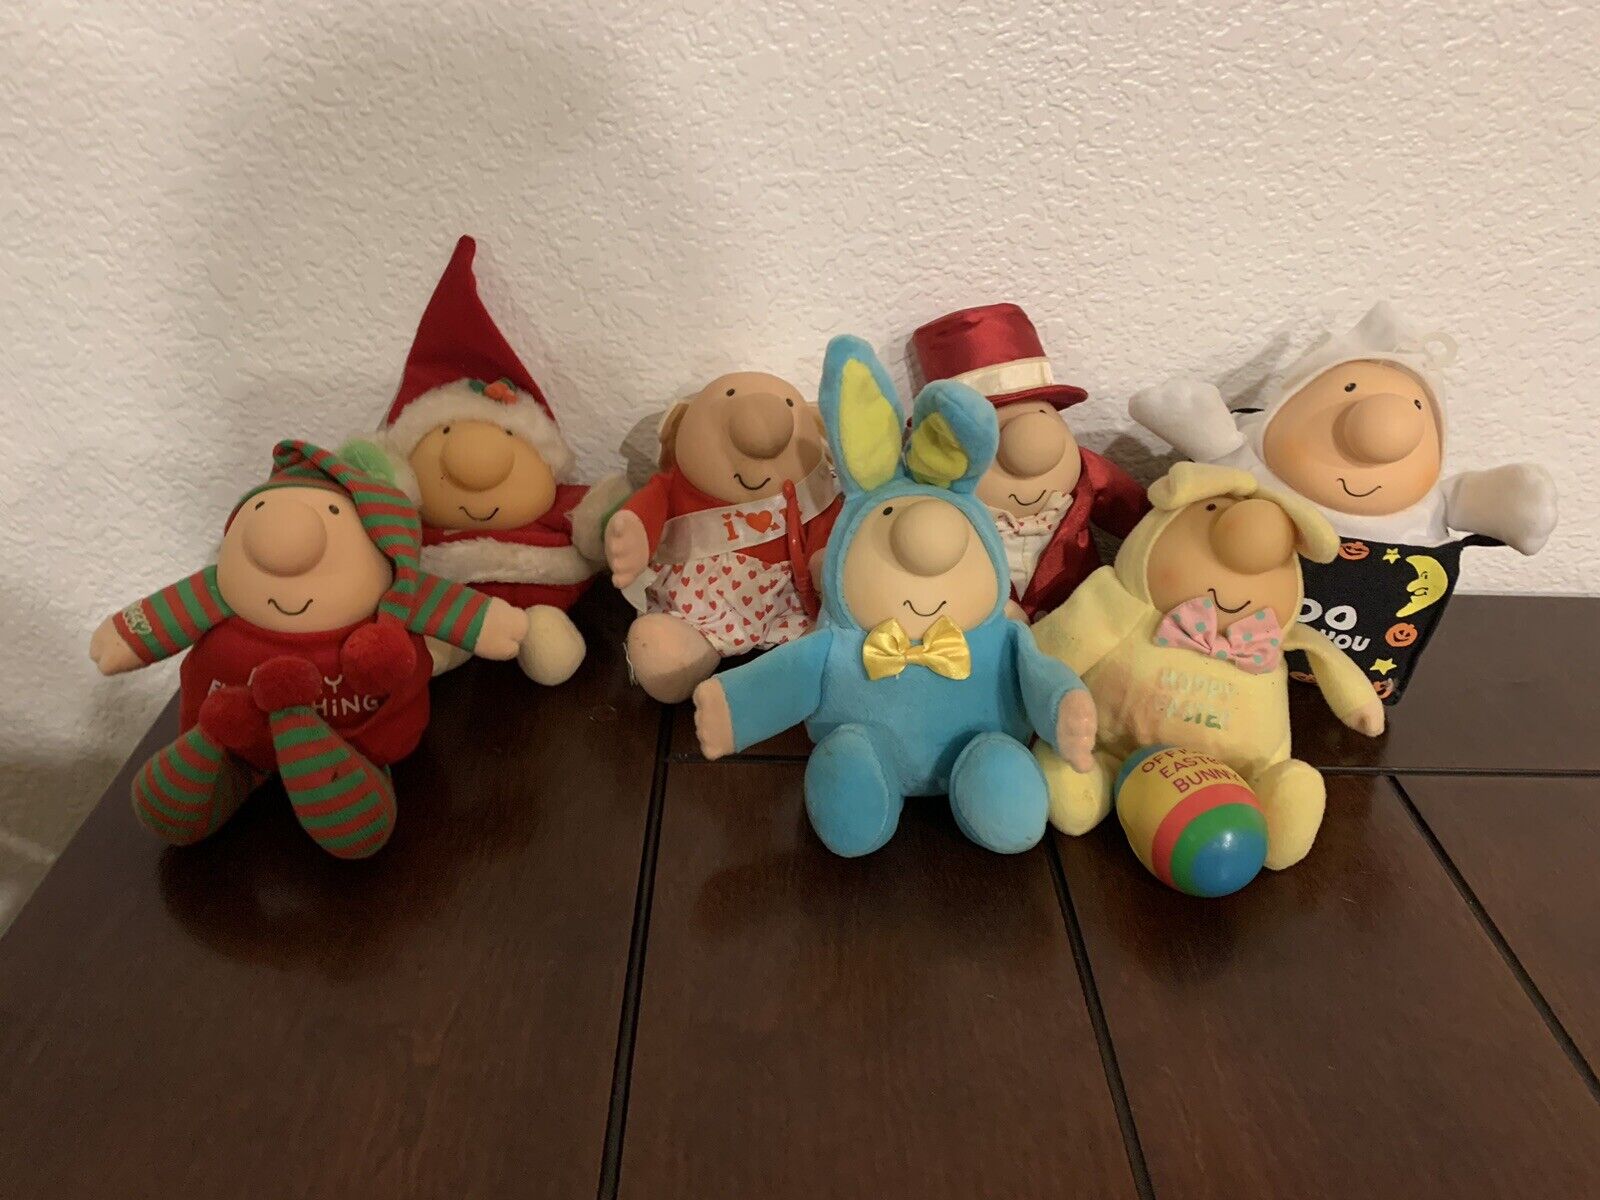 Lot of  Vintage Plush and Plastic Ziggy Collectibles From 80s & 90s Holidays